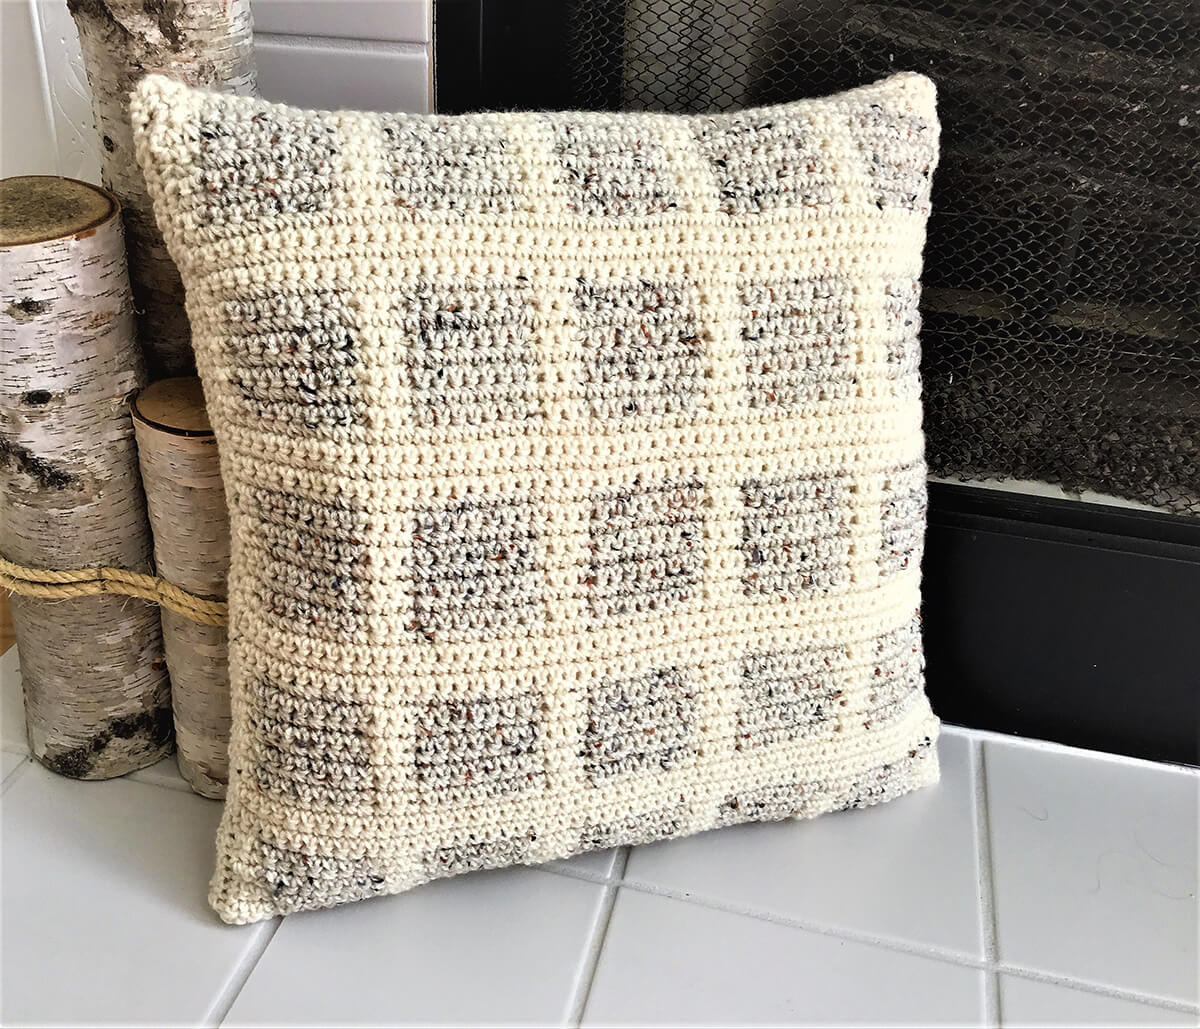 Patterned Farmhouse Crocheted Throw Pillow